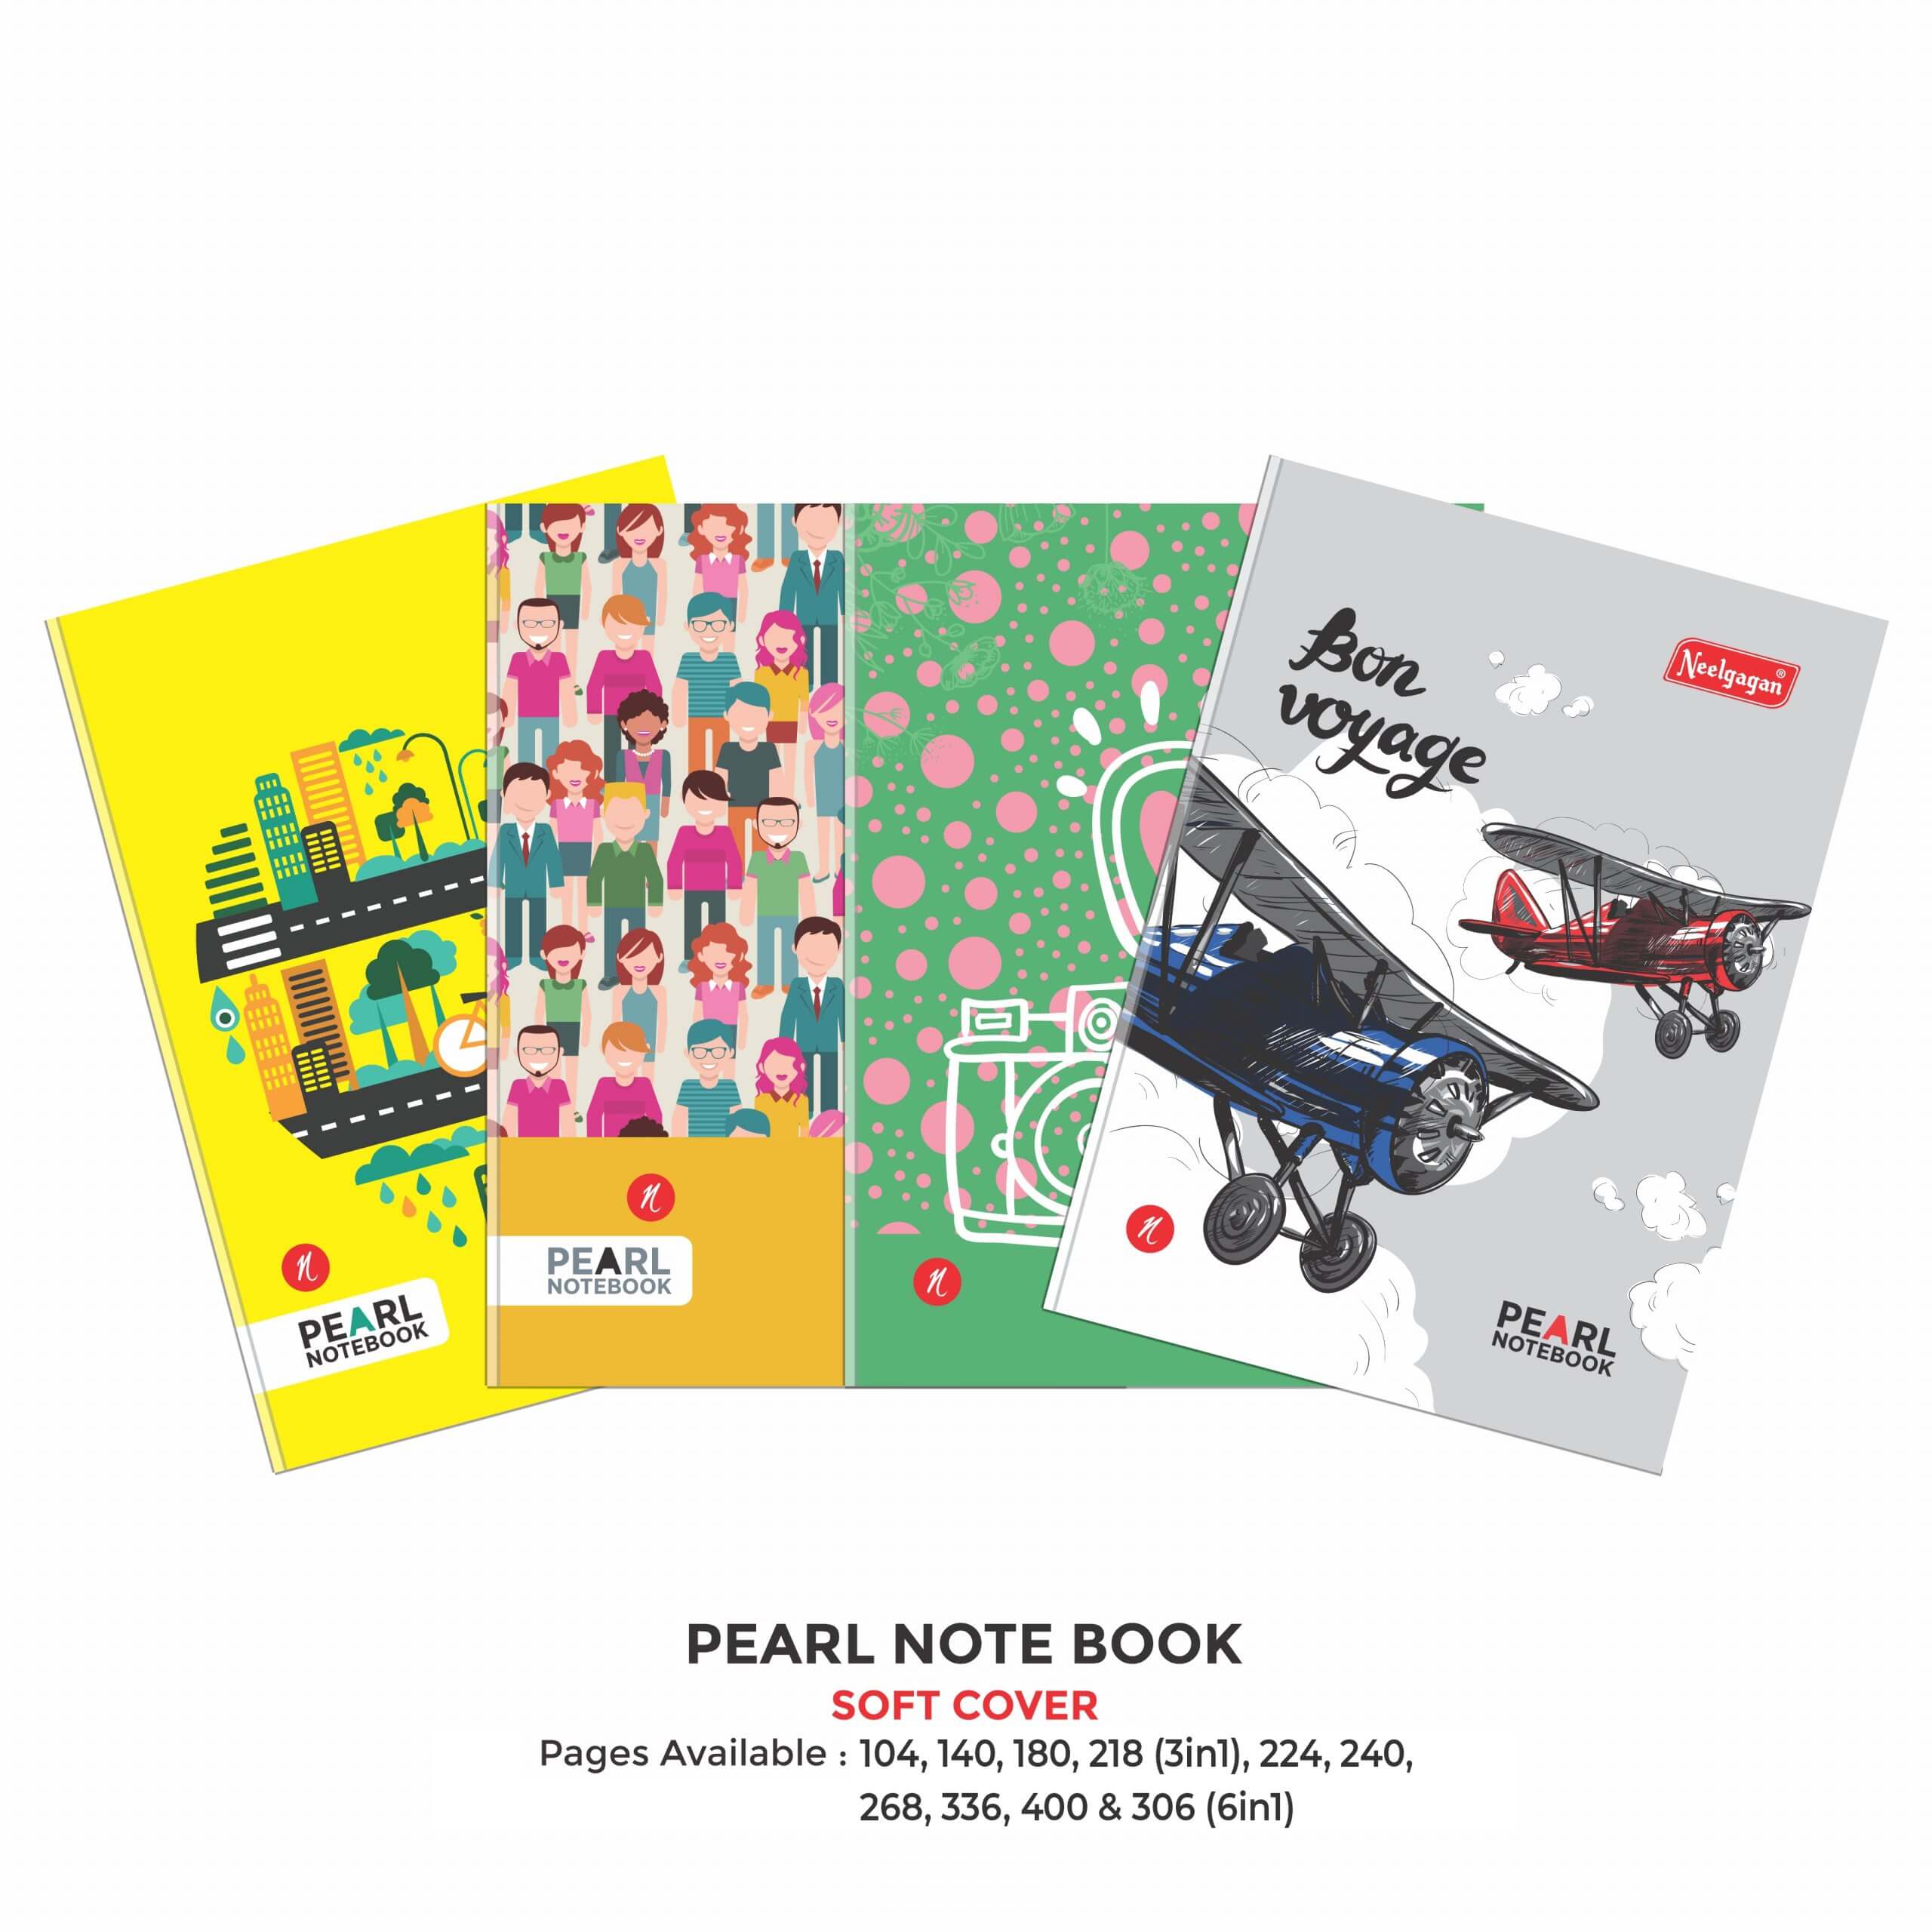 Pearl Notebook A4, Register, (21cm X 29.7cm) Softcover